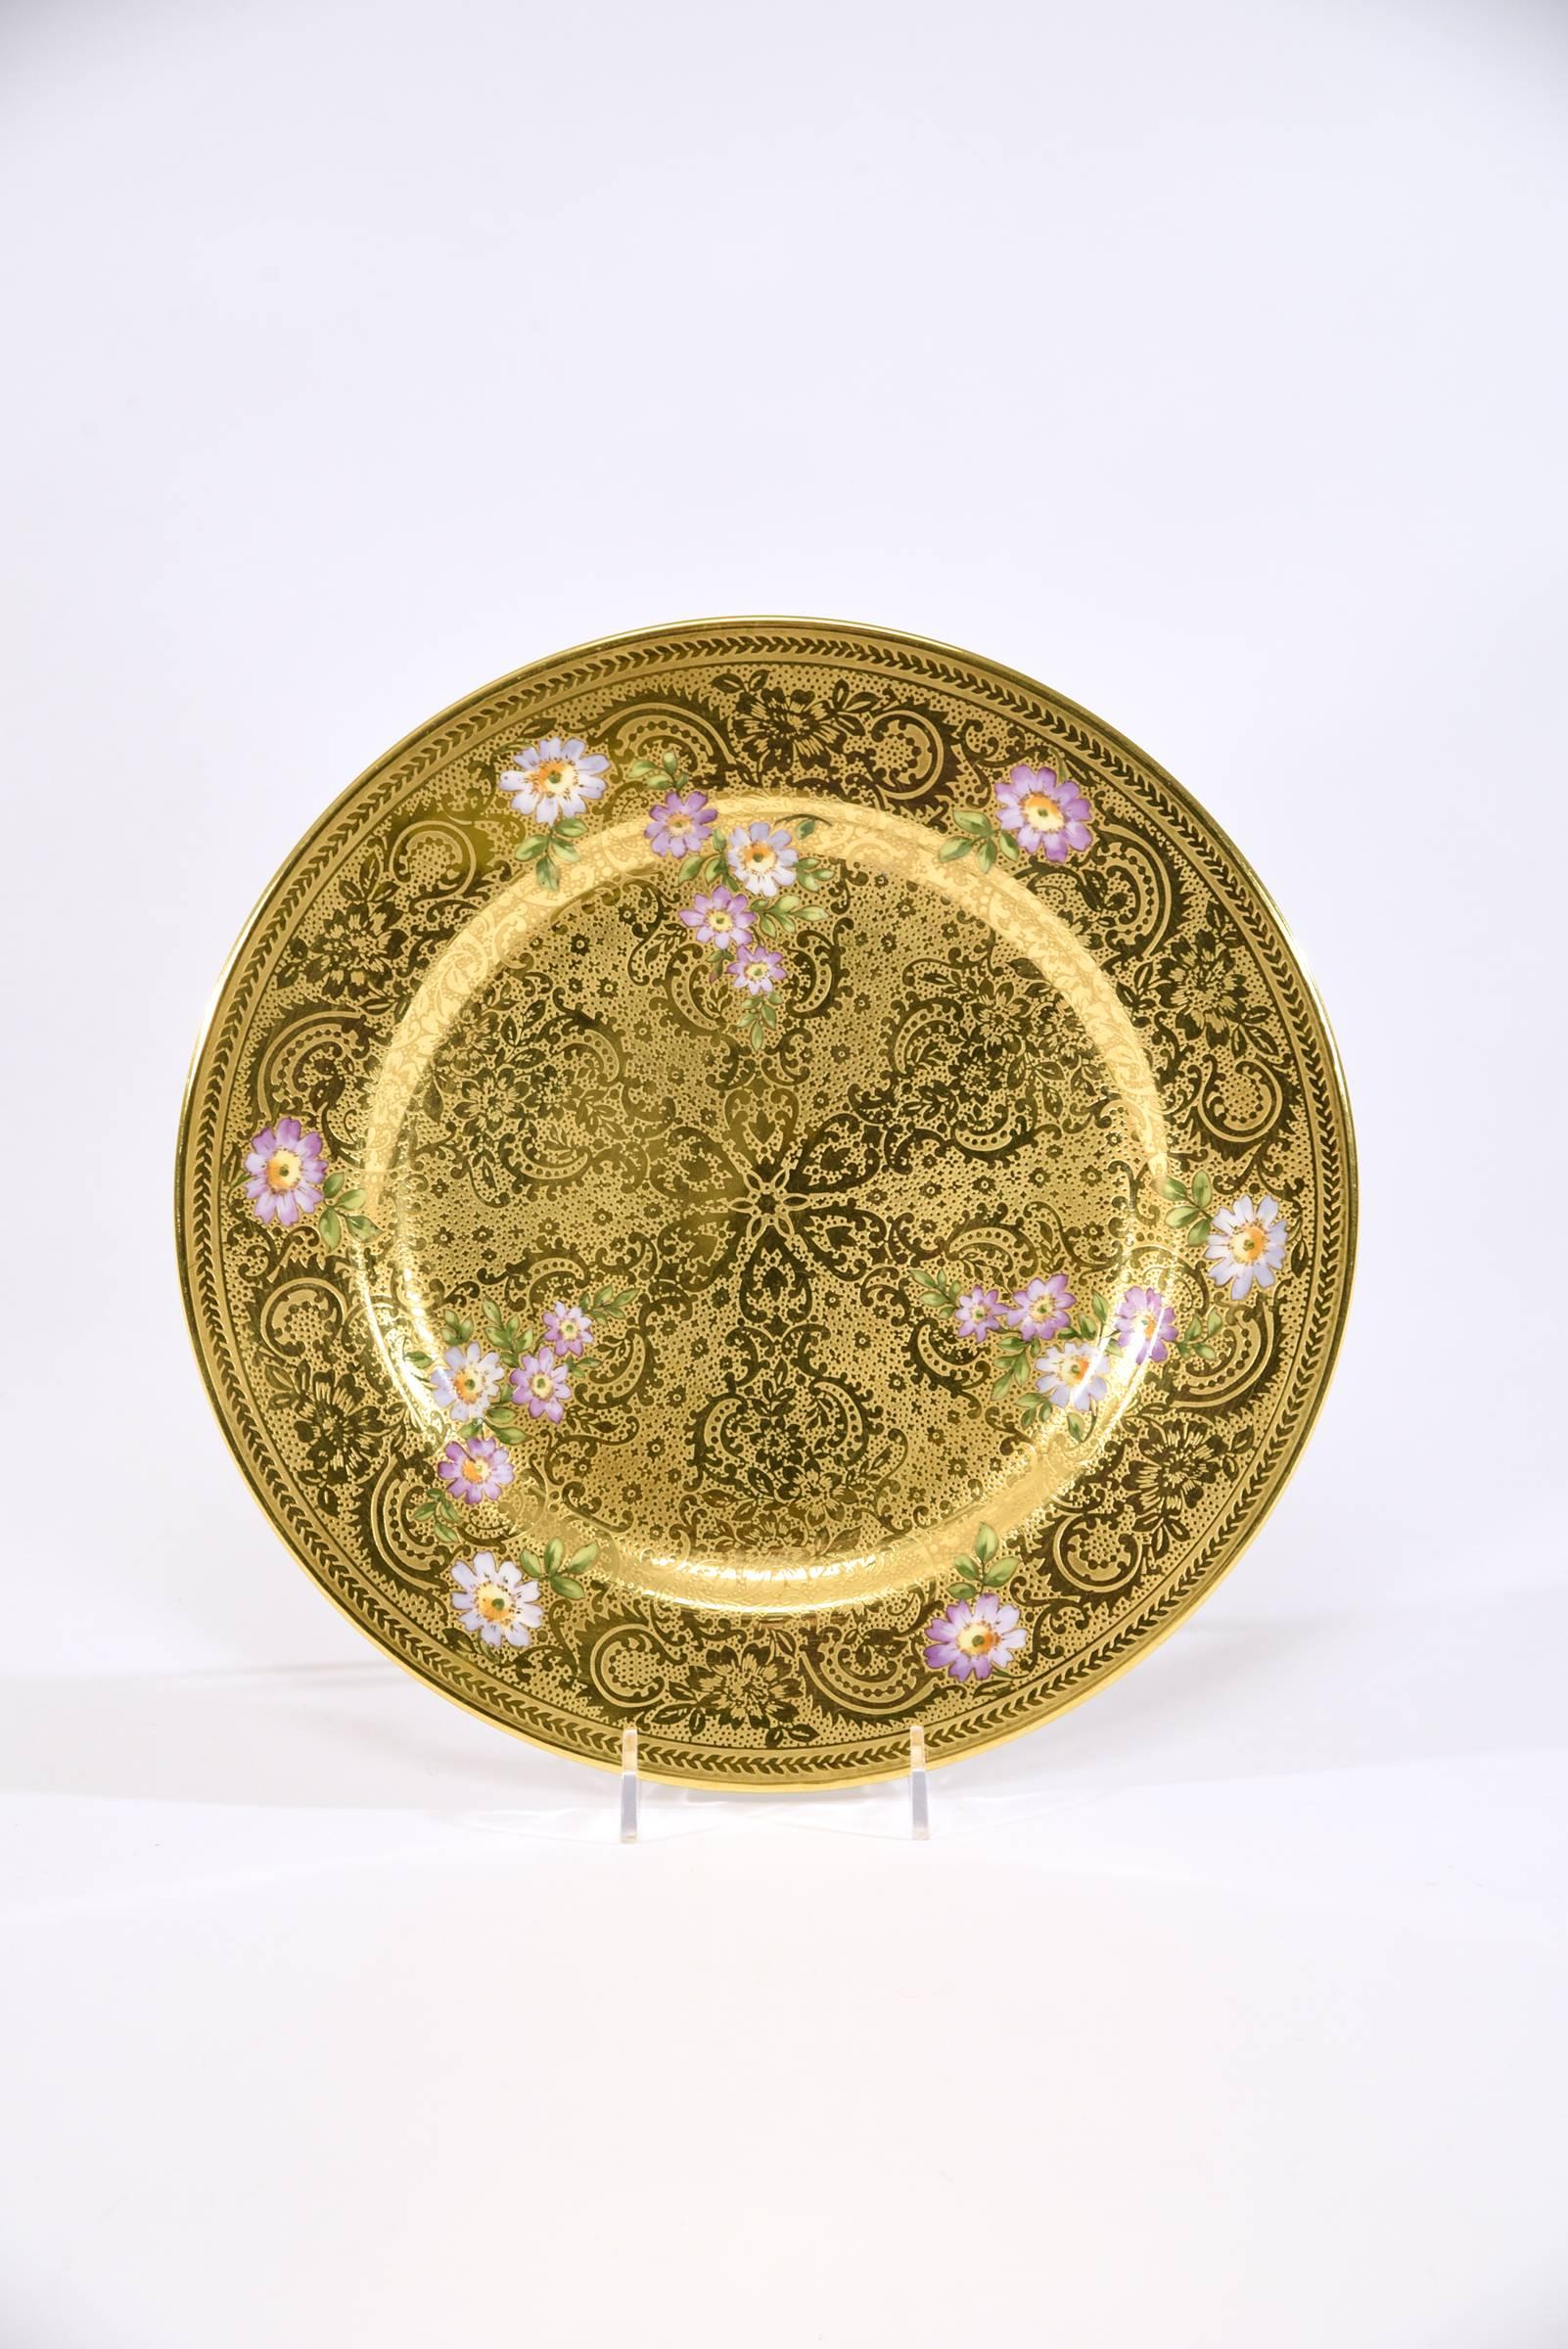 French 12 Limoges Embossed Allover Gold Service Plates with Hand-Painted Purple Flowers